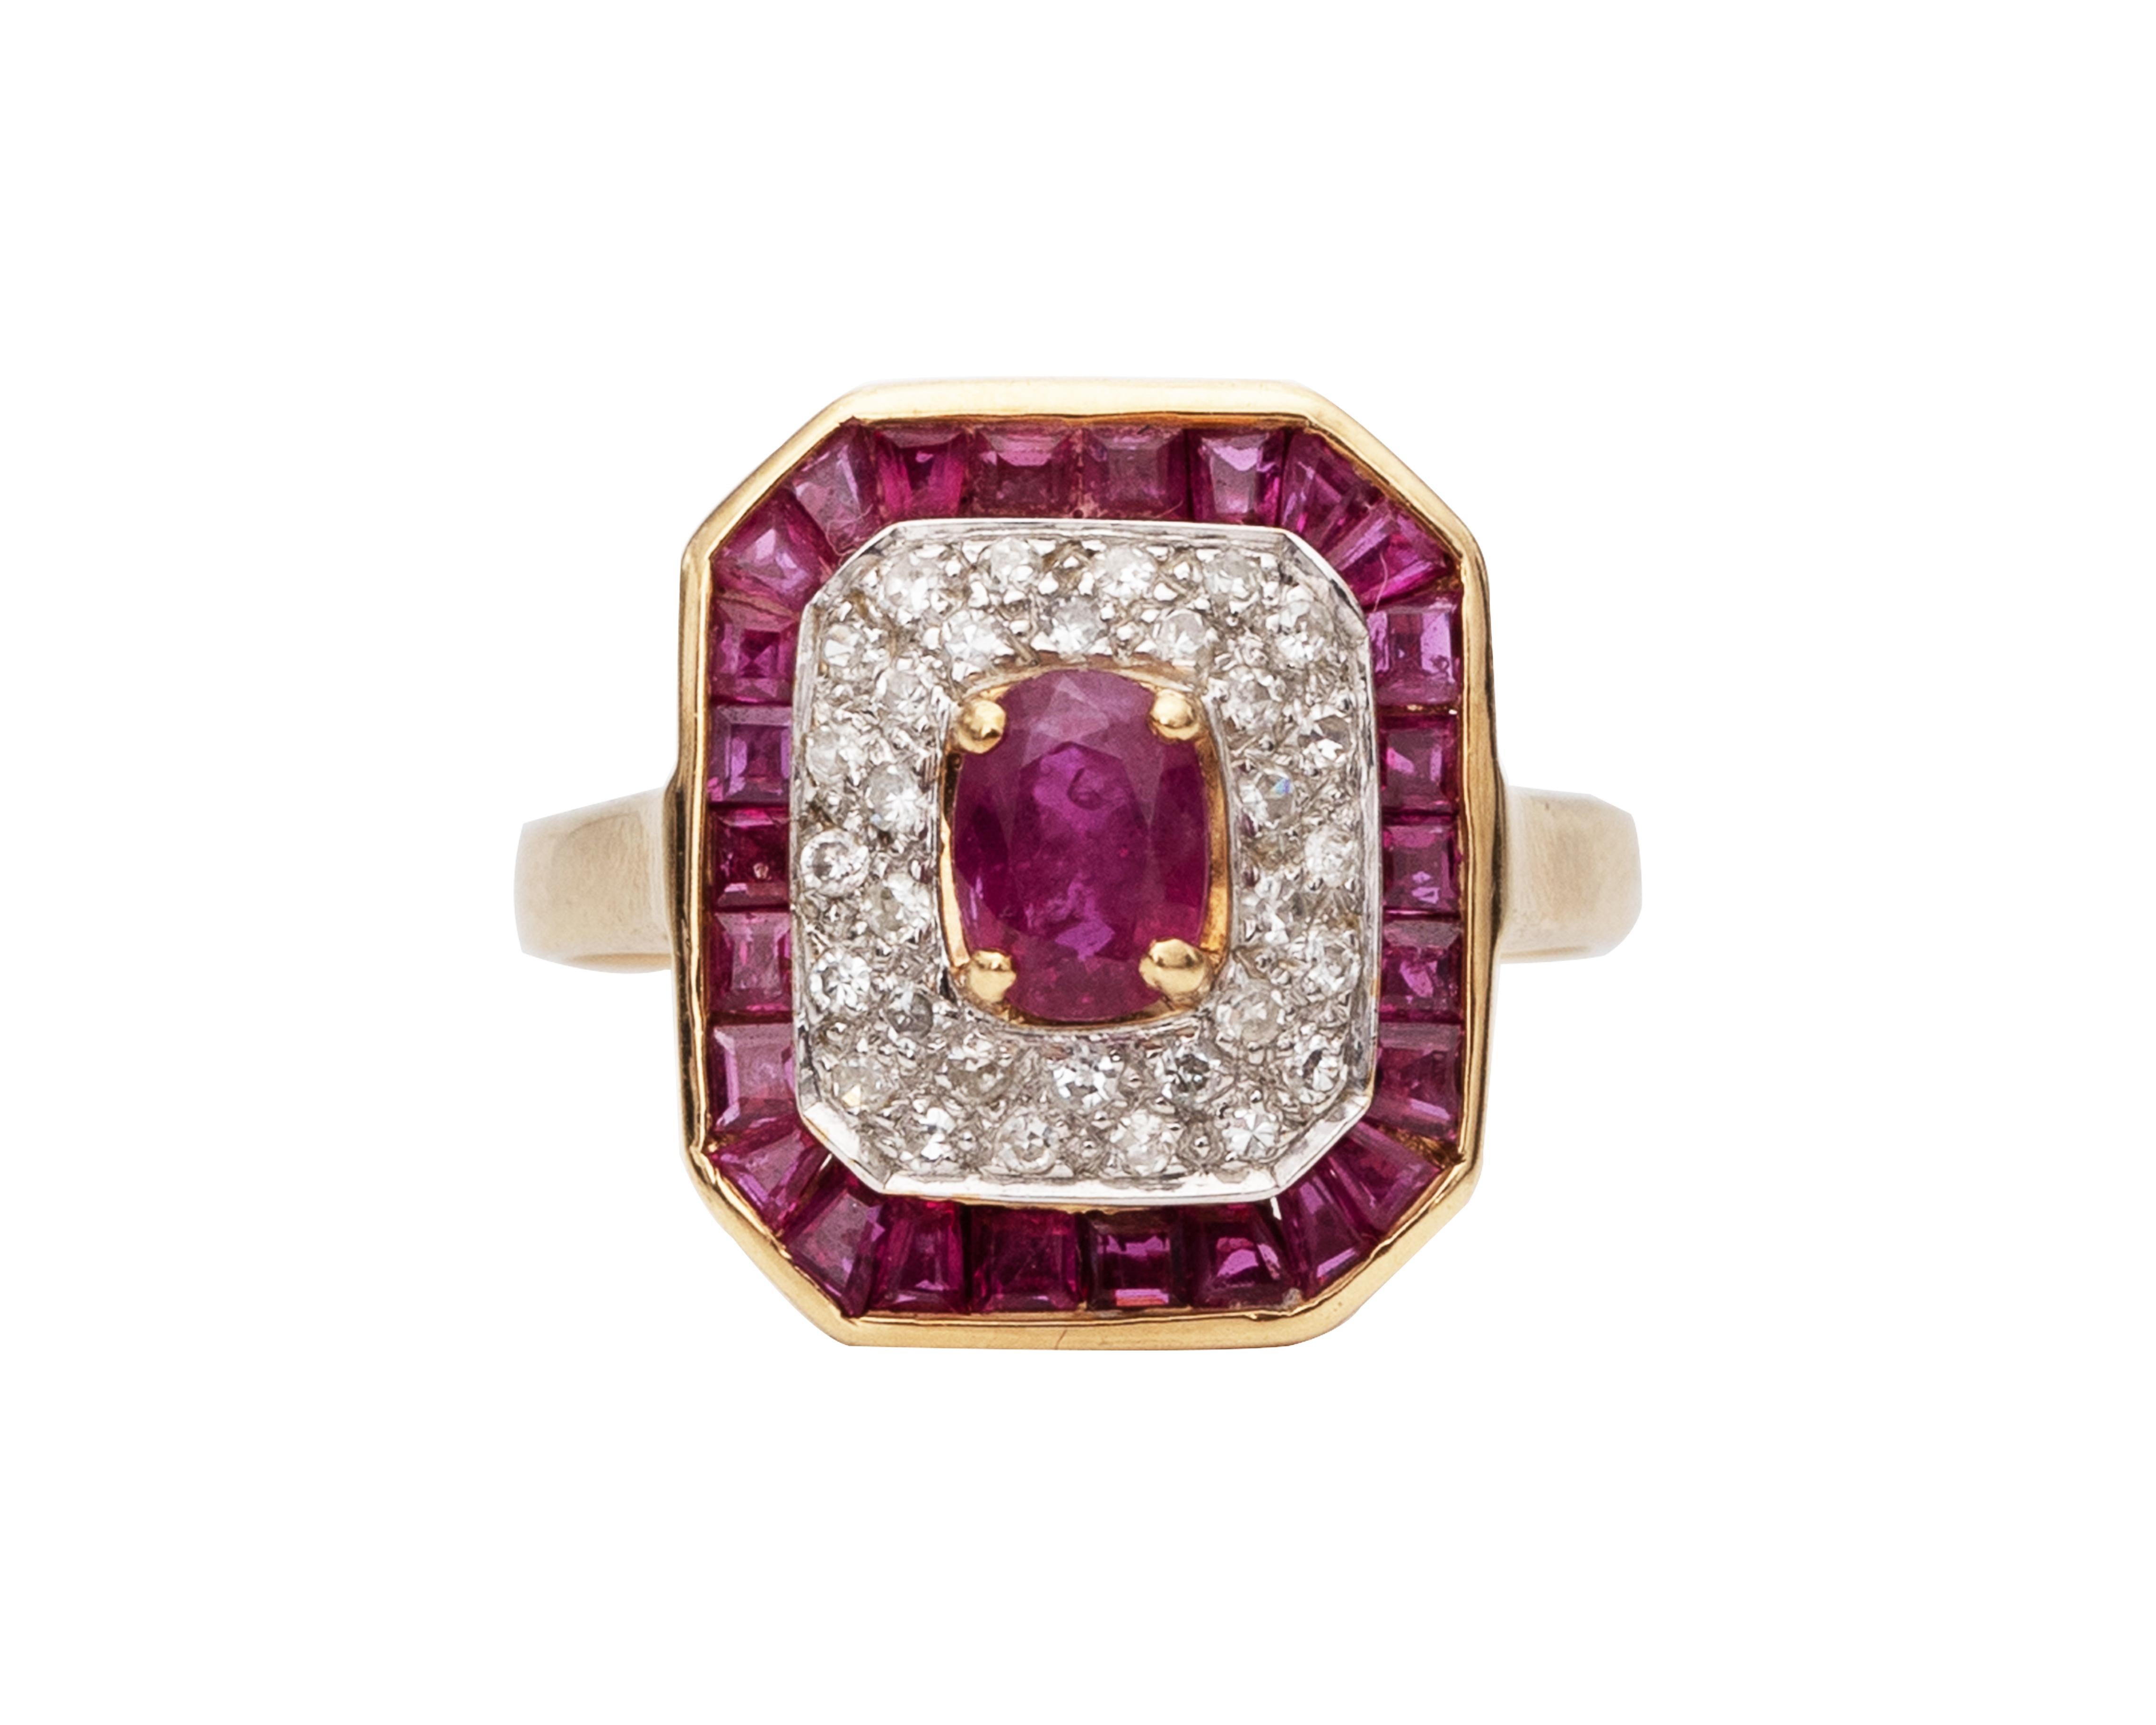 1.4 Carat Total Ruby and Diamond Ring, 14 Karat Gold In Excellent Condition For Sale In Atlanta, GA